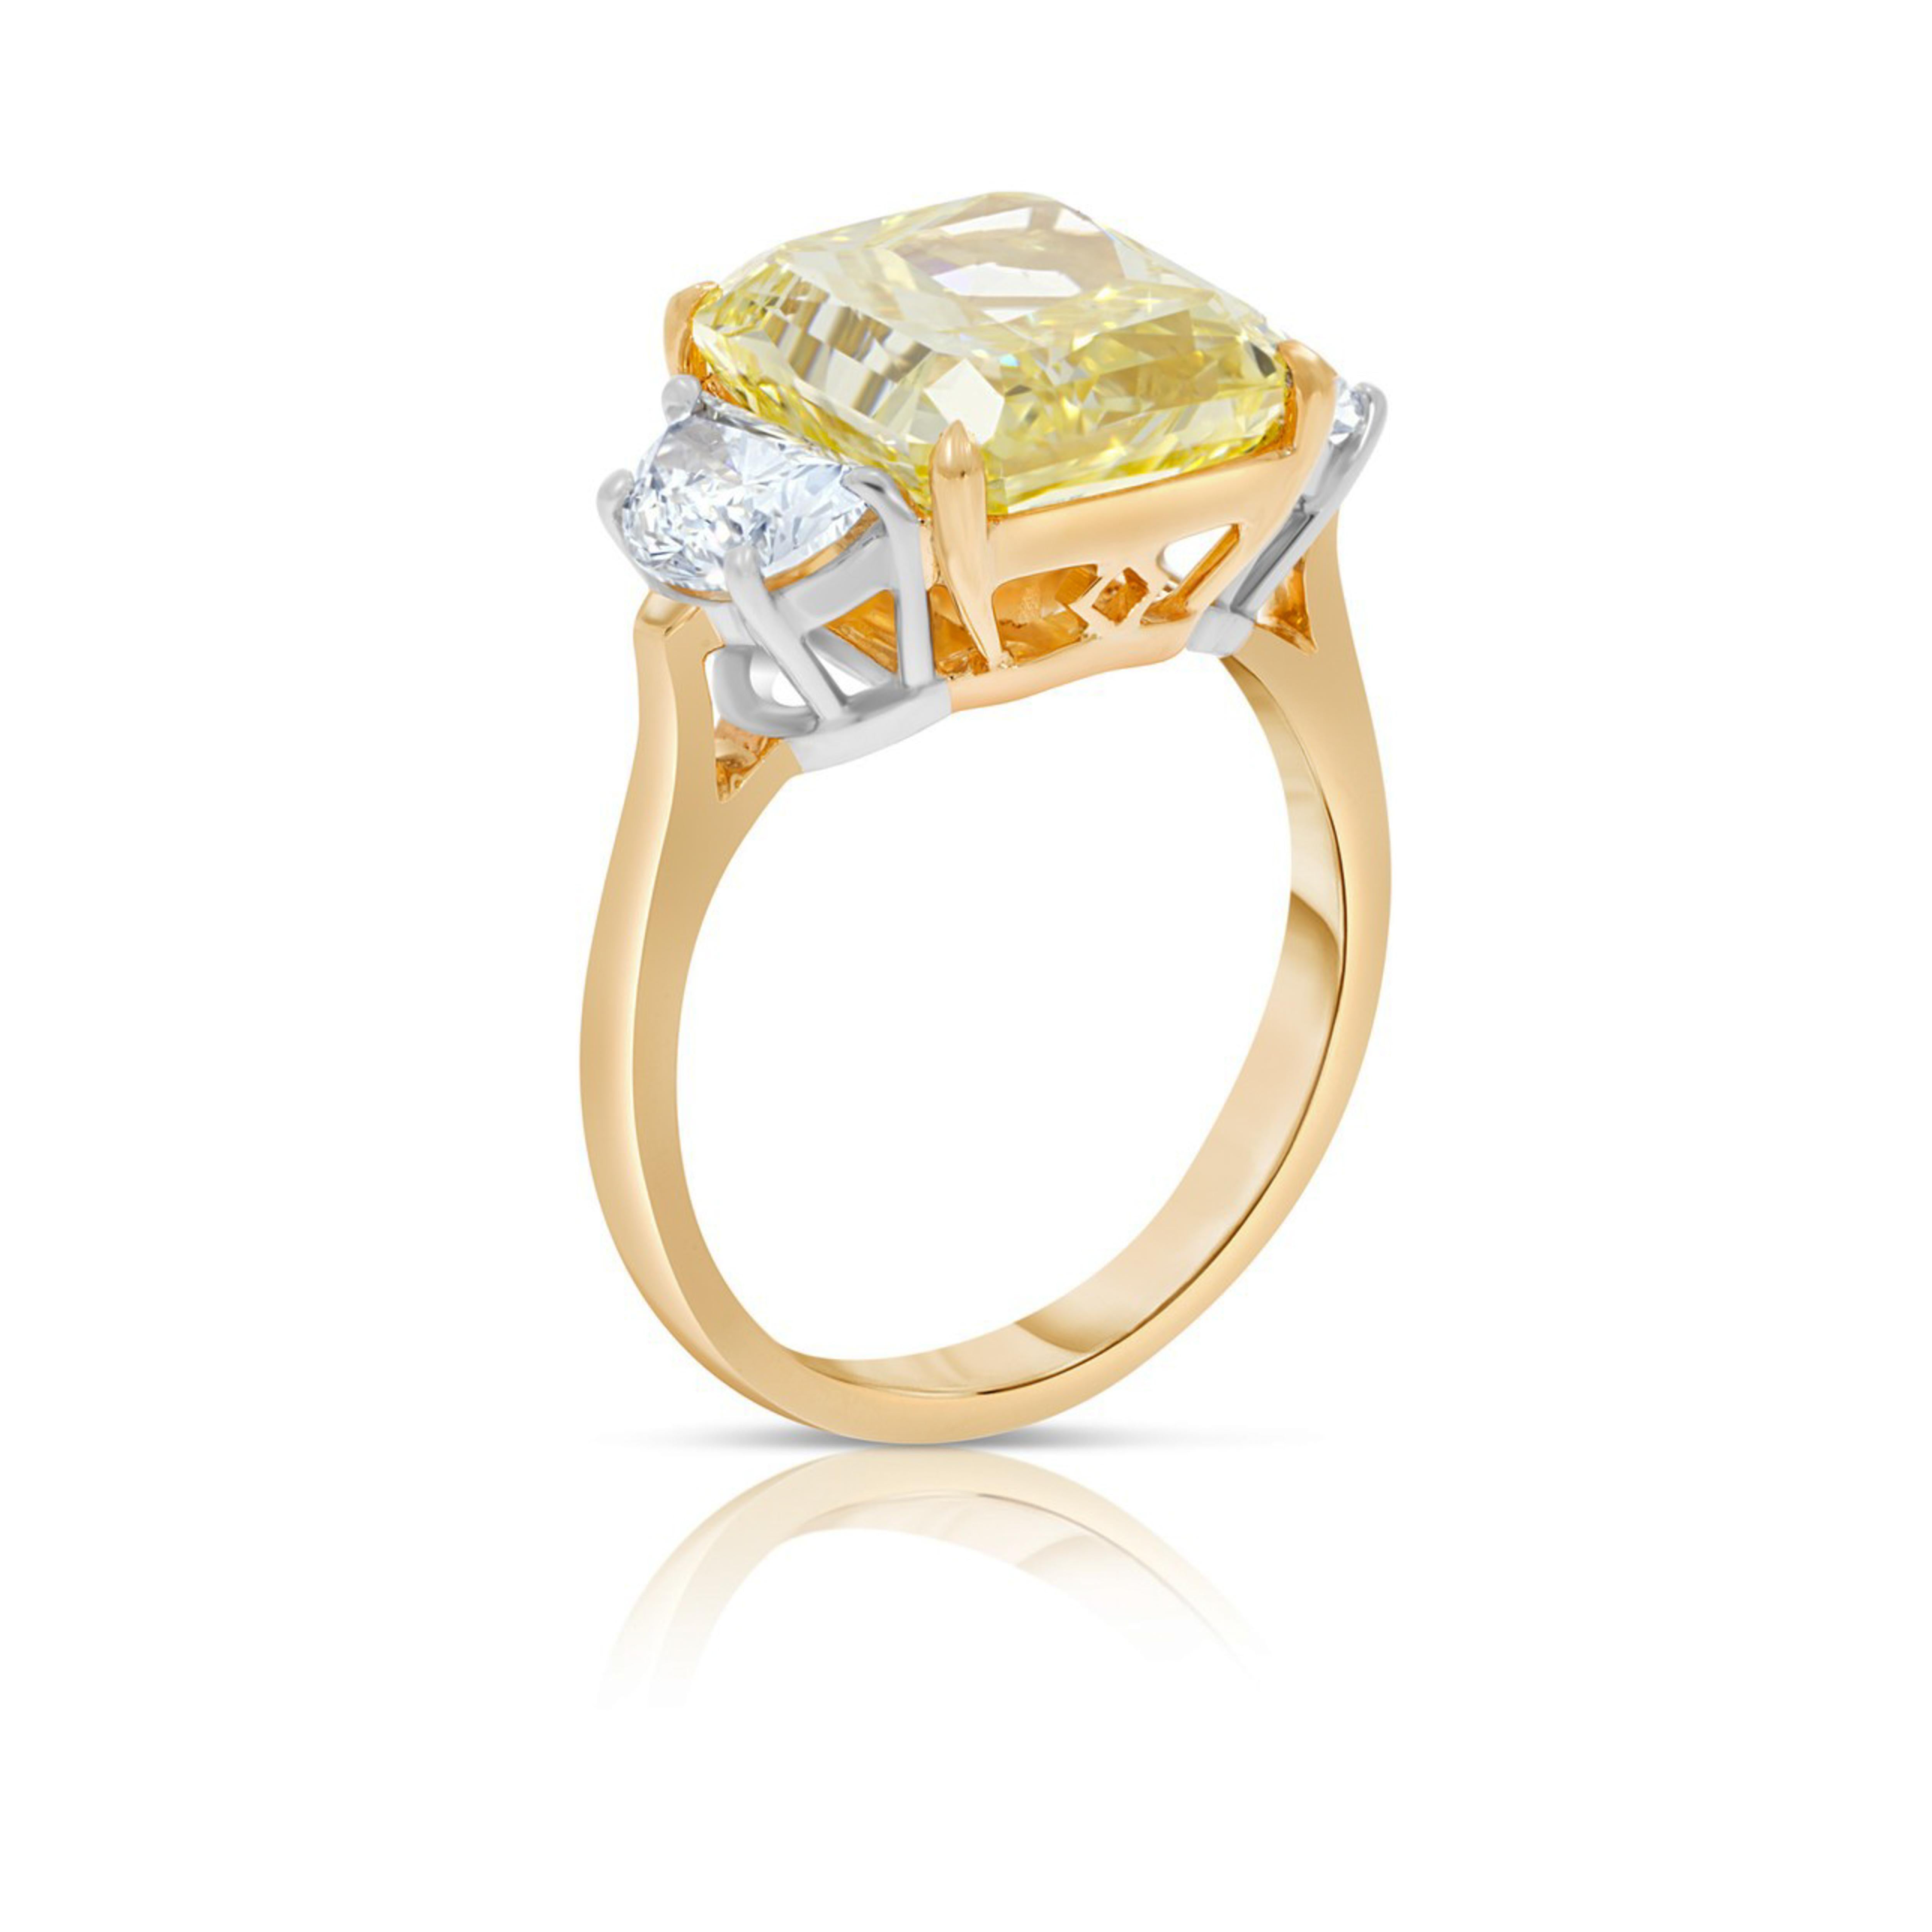 Platinum and 18K Yellow Gold Ring.  
Centering this gorgeous ring is a Radiant cut Fancy Intense Yellow Diamond, flanked by 1.30 carat total weight Half moon cut Diamond at each side.
Finger size: 6.5 +
GIA Certificate # 6197575388